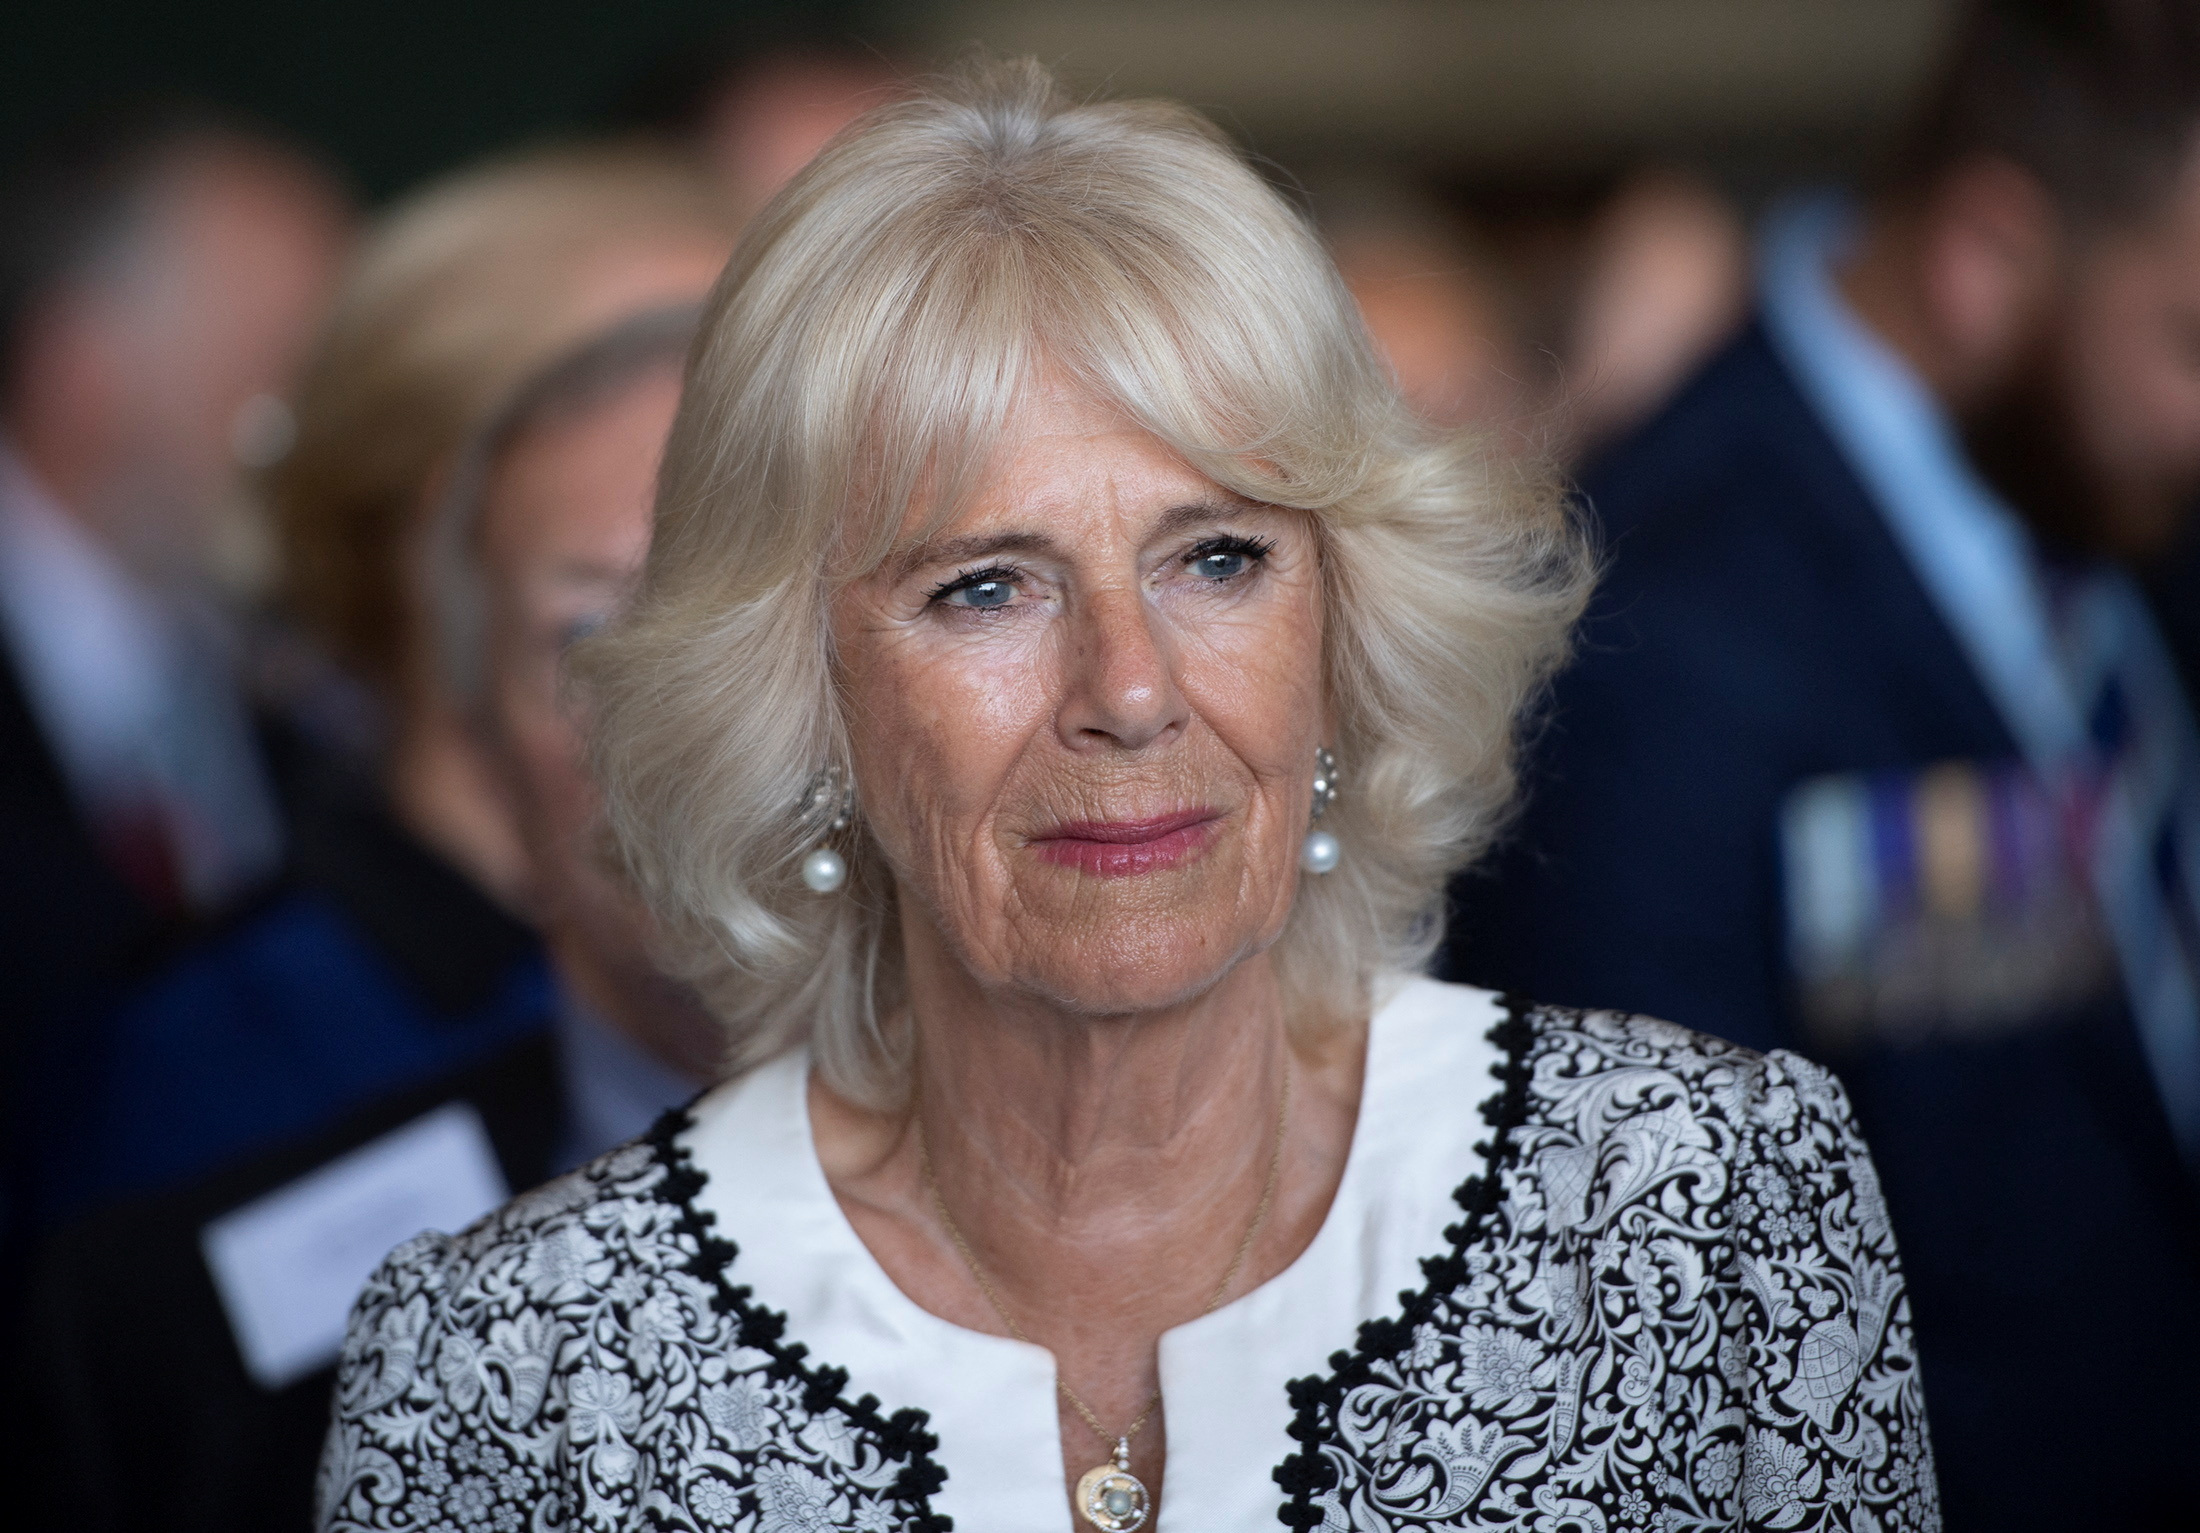 From ‘Rottweiler’ to Queen Consort, Camilla’s rise from shadow of Diana